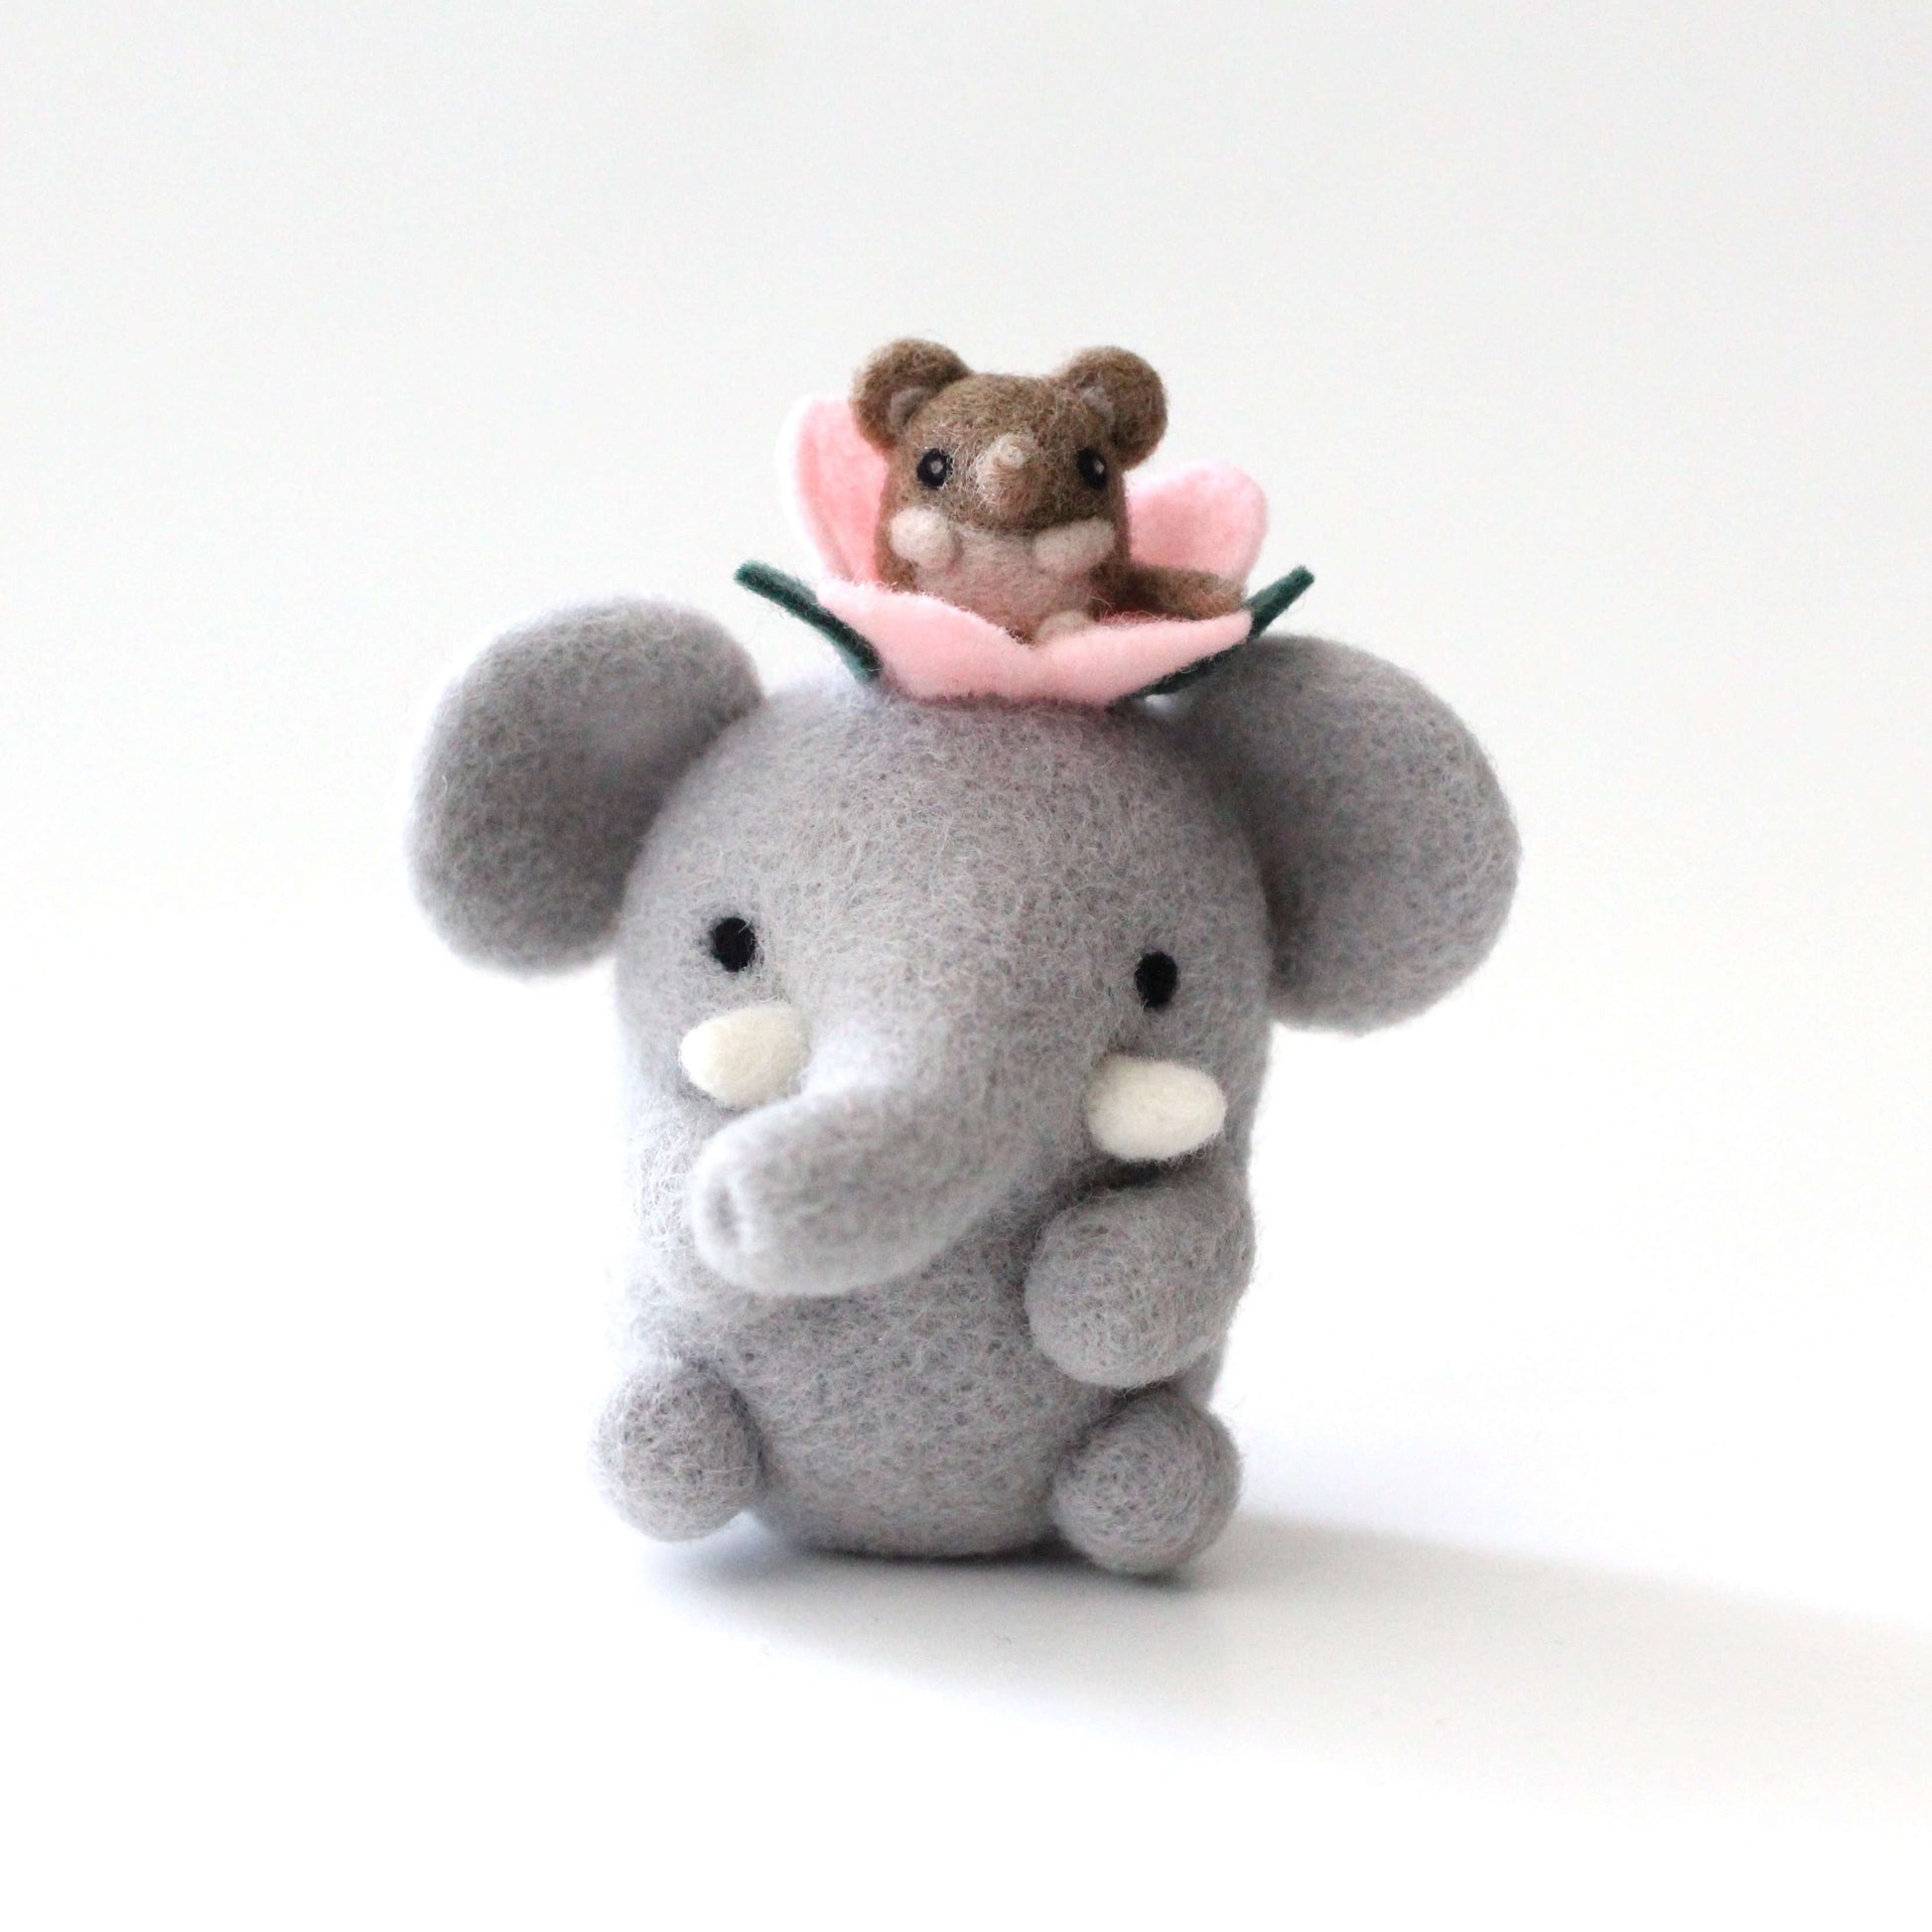 Elephant and Elephant Shrew in a Flower by Wild Whimsy Woolies